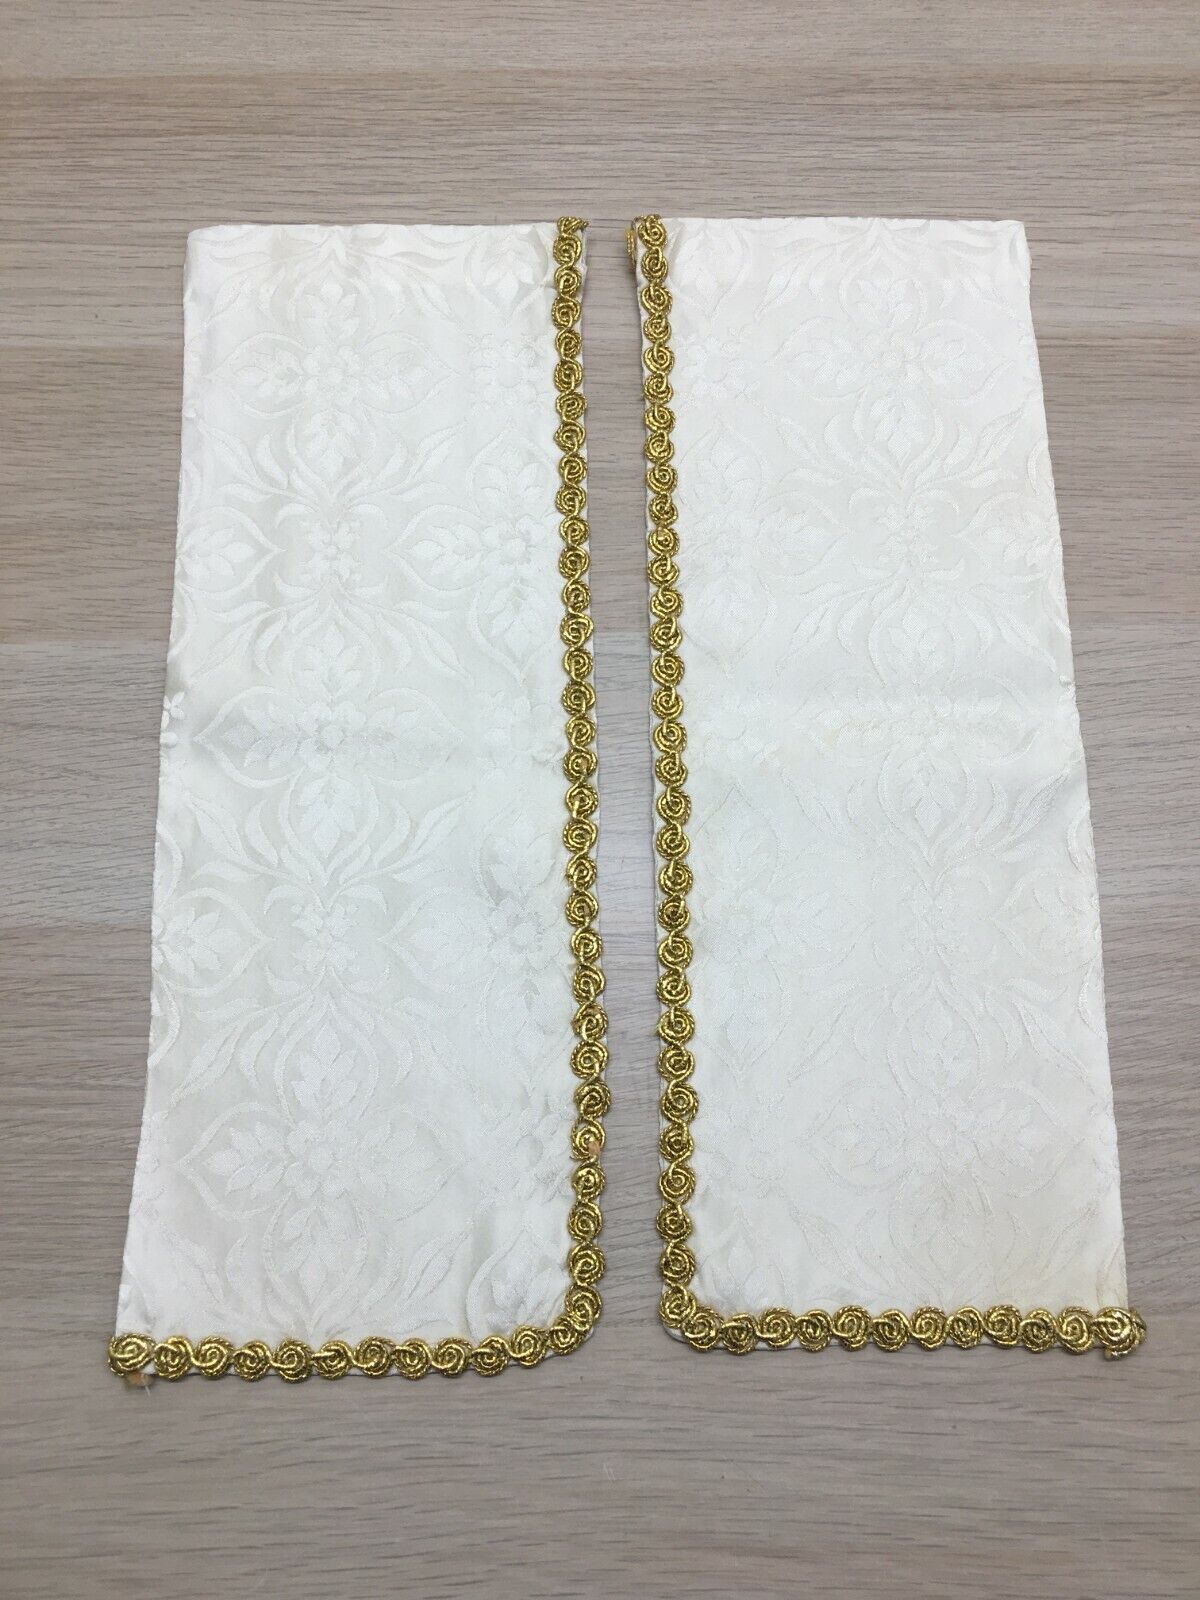 WHITE TABERNACLE CURTAINS WITH GOLD EDGE